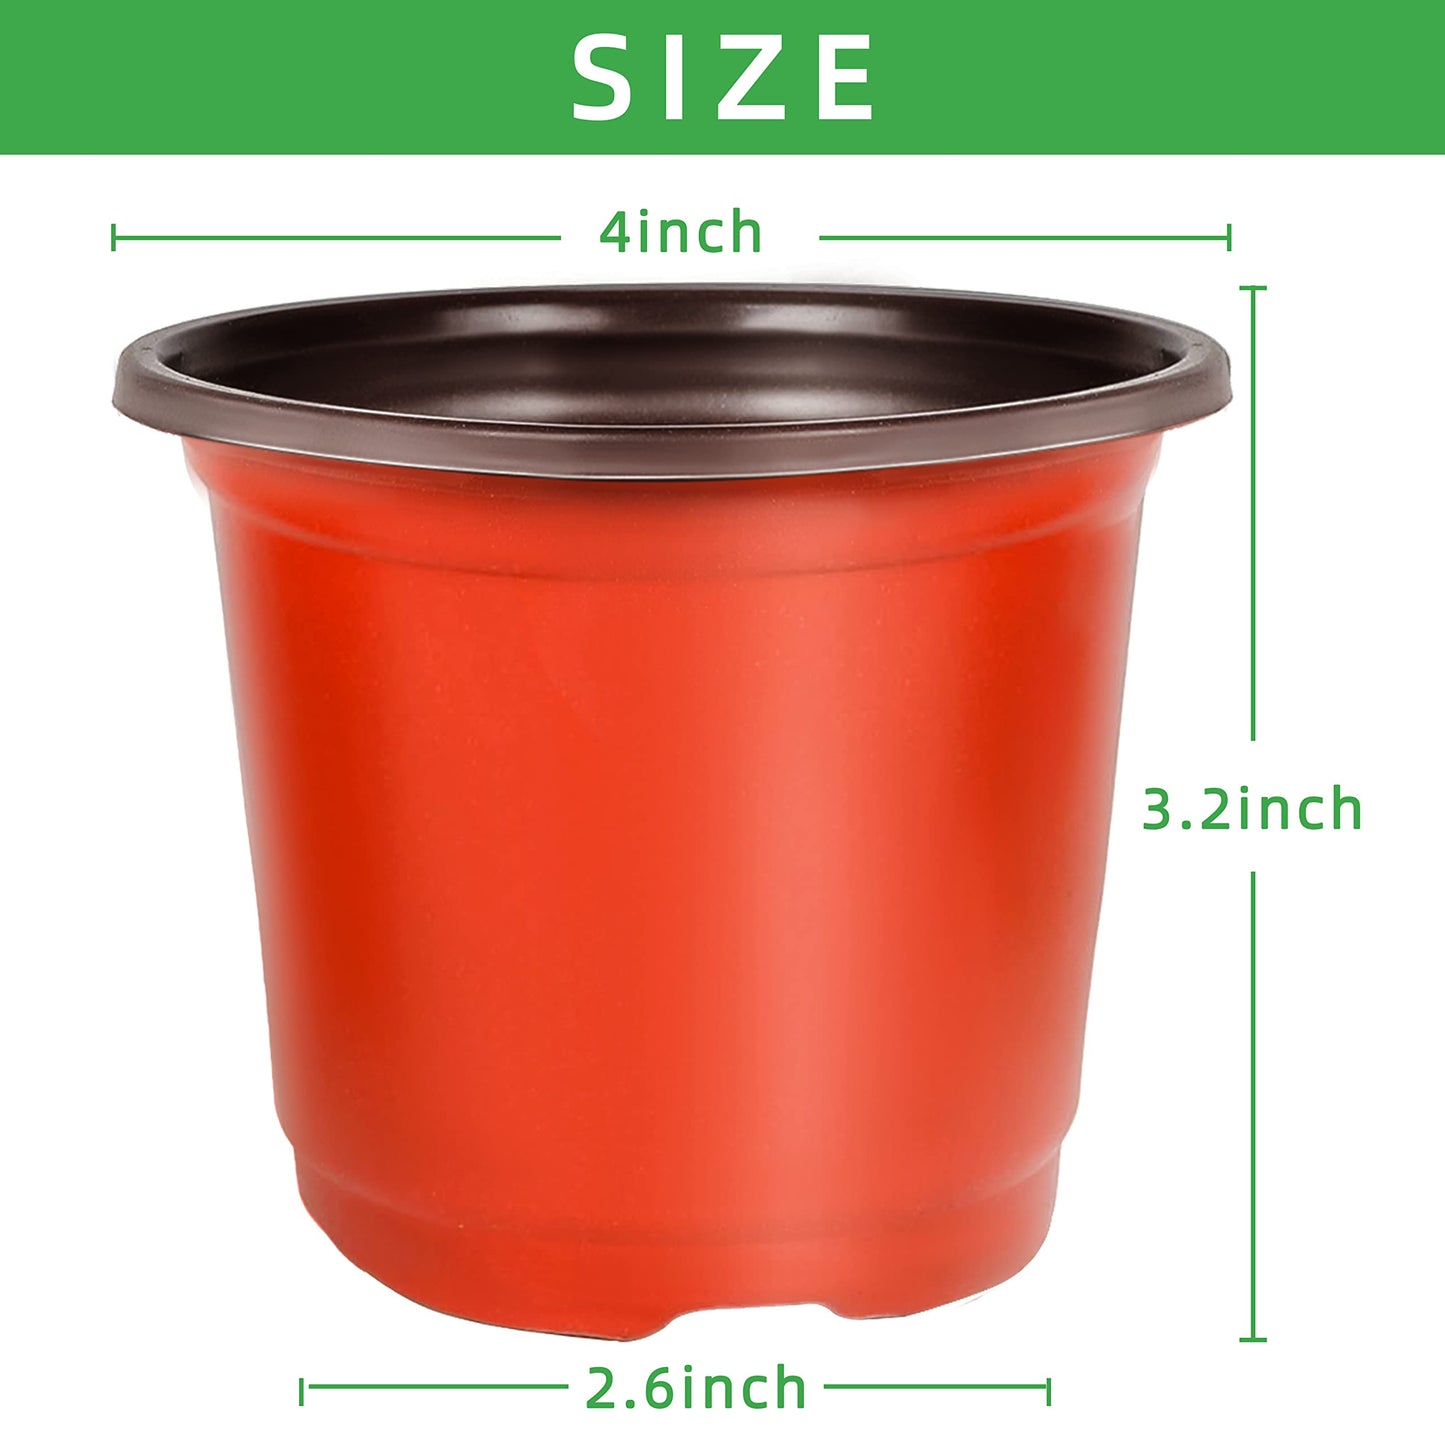 TDHDIKE Plastic Planter Nursery Pots 4" Small (50pcs Pots and 50pcs Labels) Seedlings Flower Pots Container Seed Starting Pots for Plants